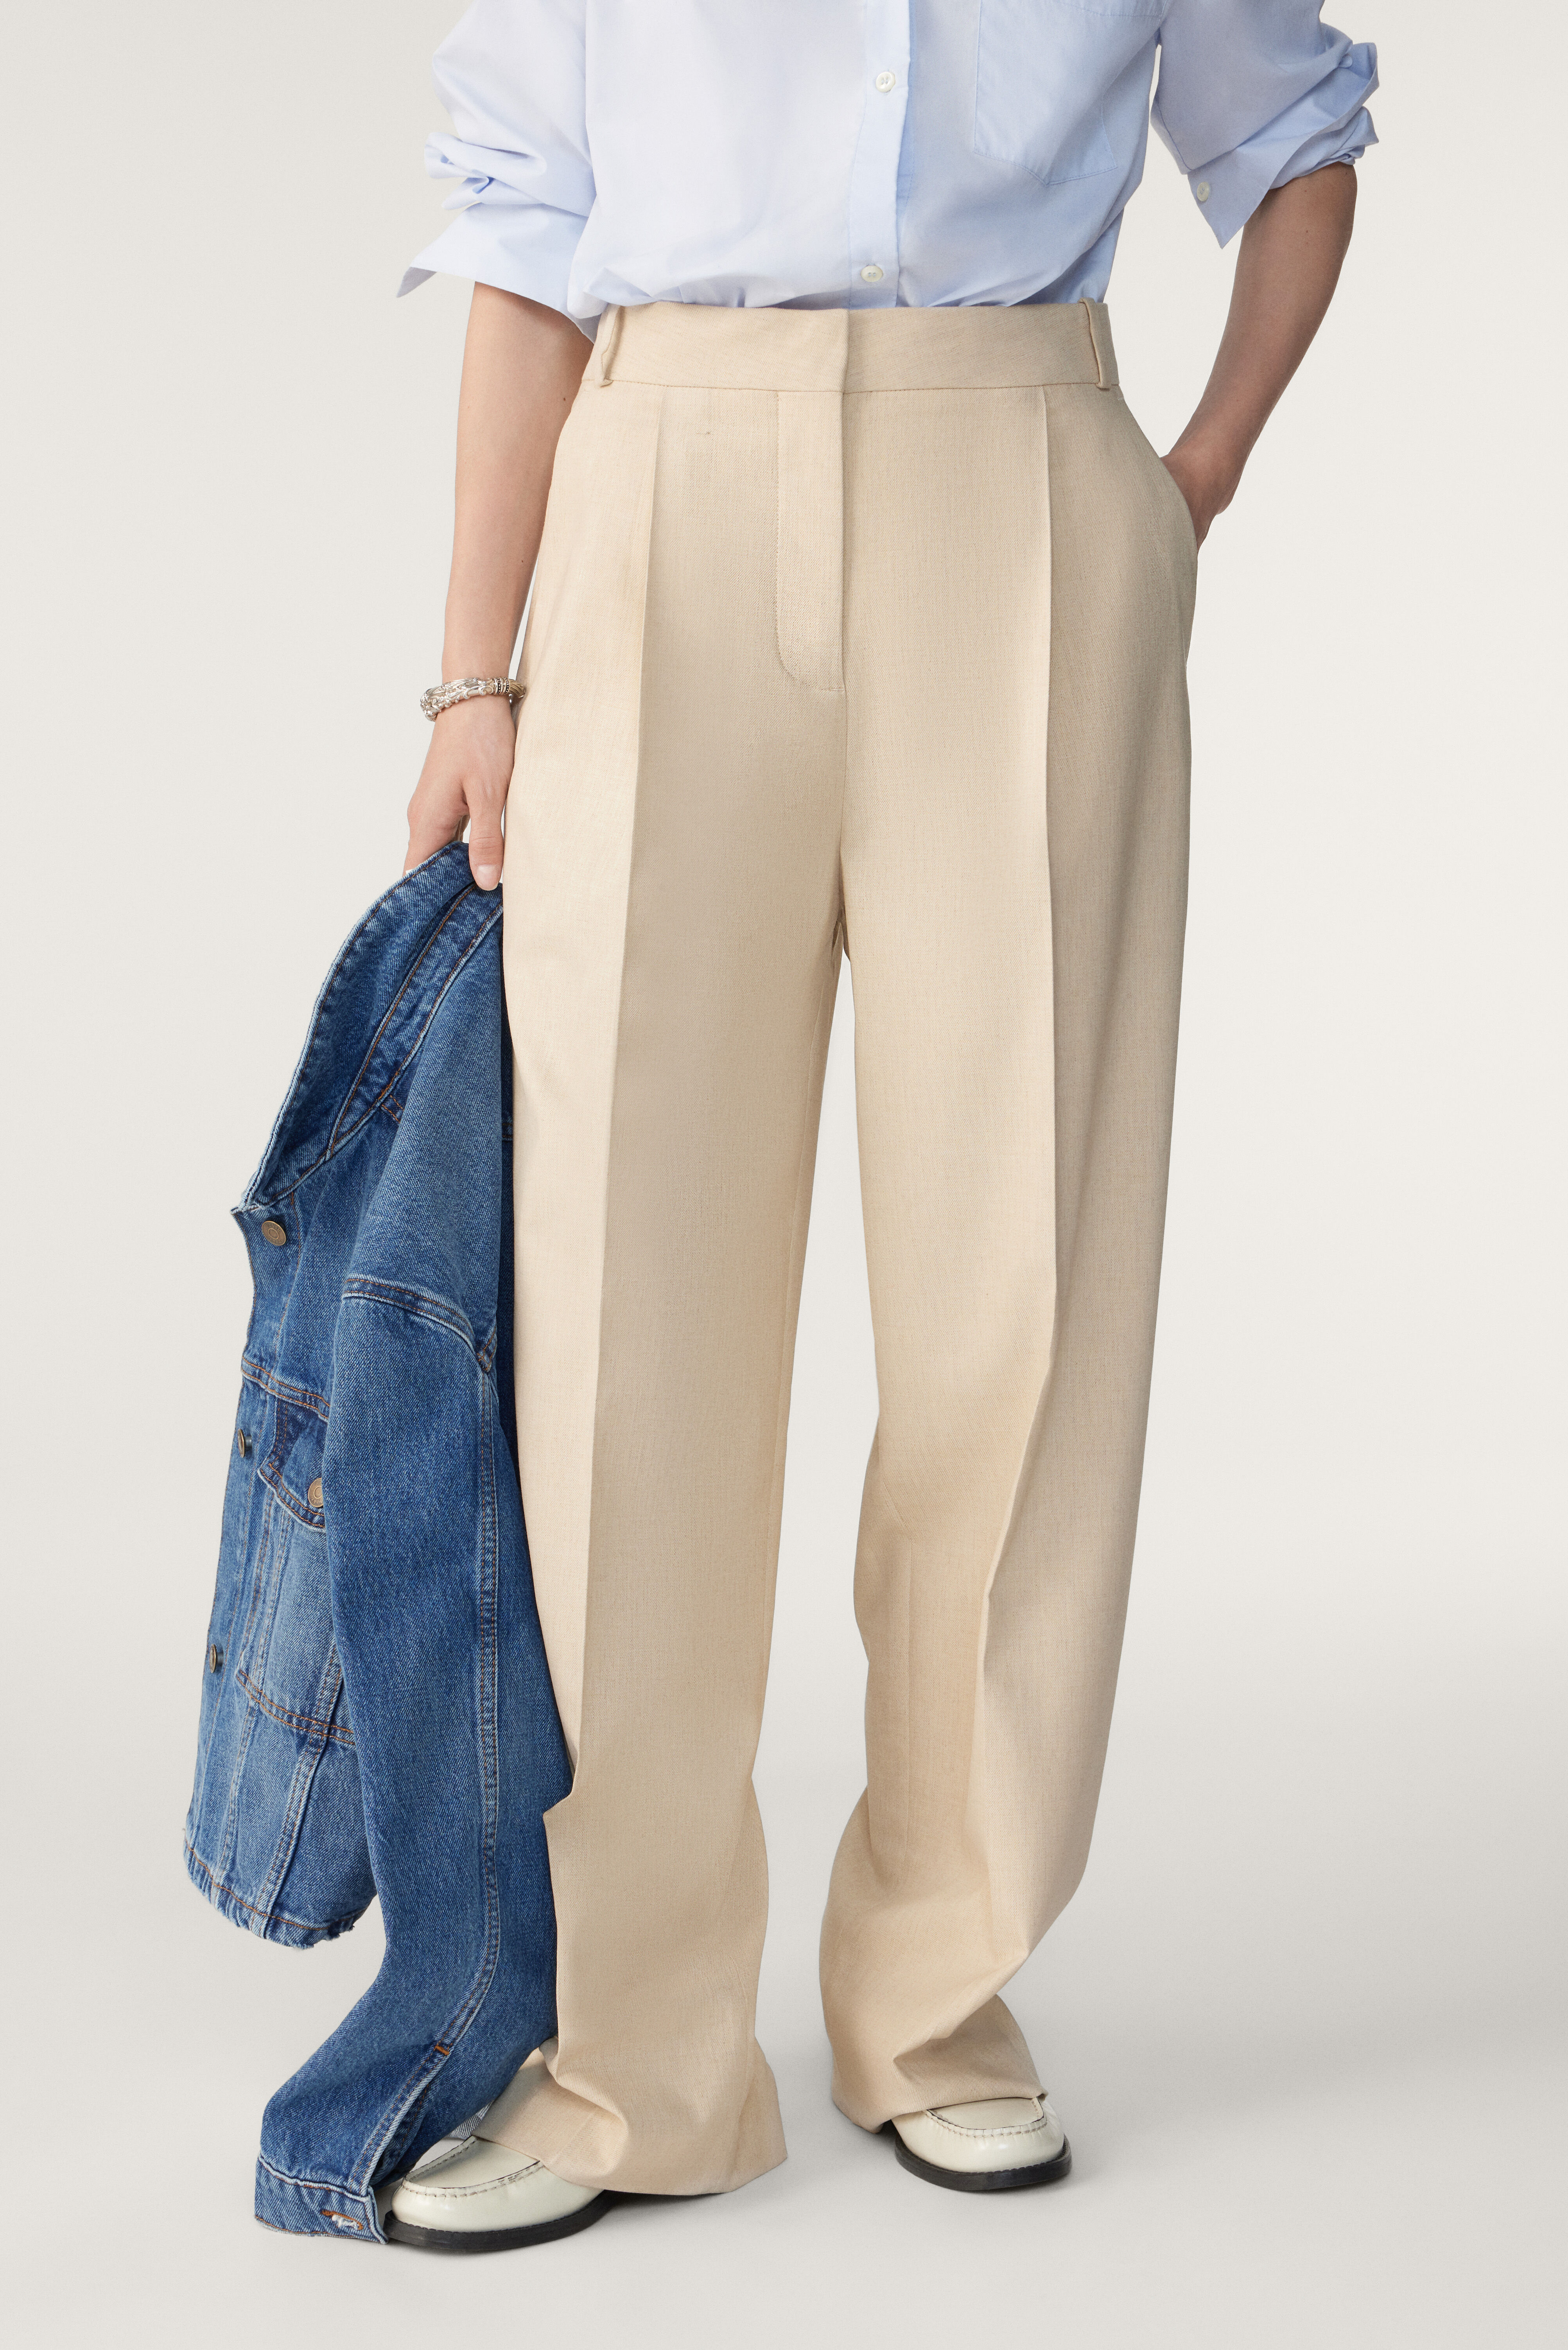 All About That Sass Taupe Trouser Pants | Classy outfits, Style, Fashion